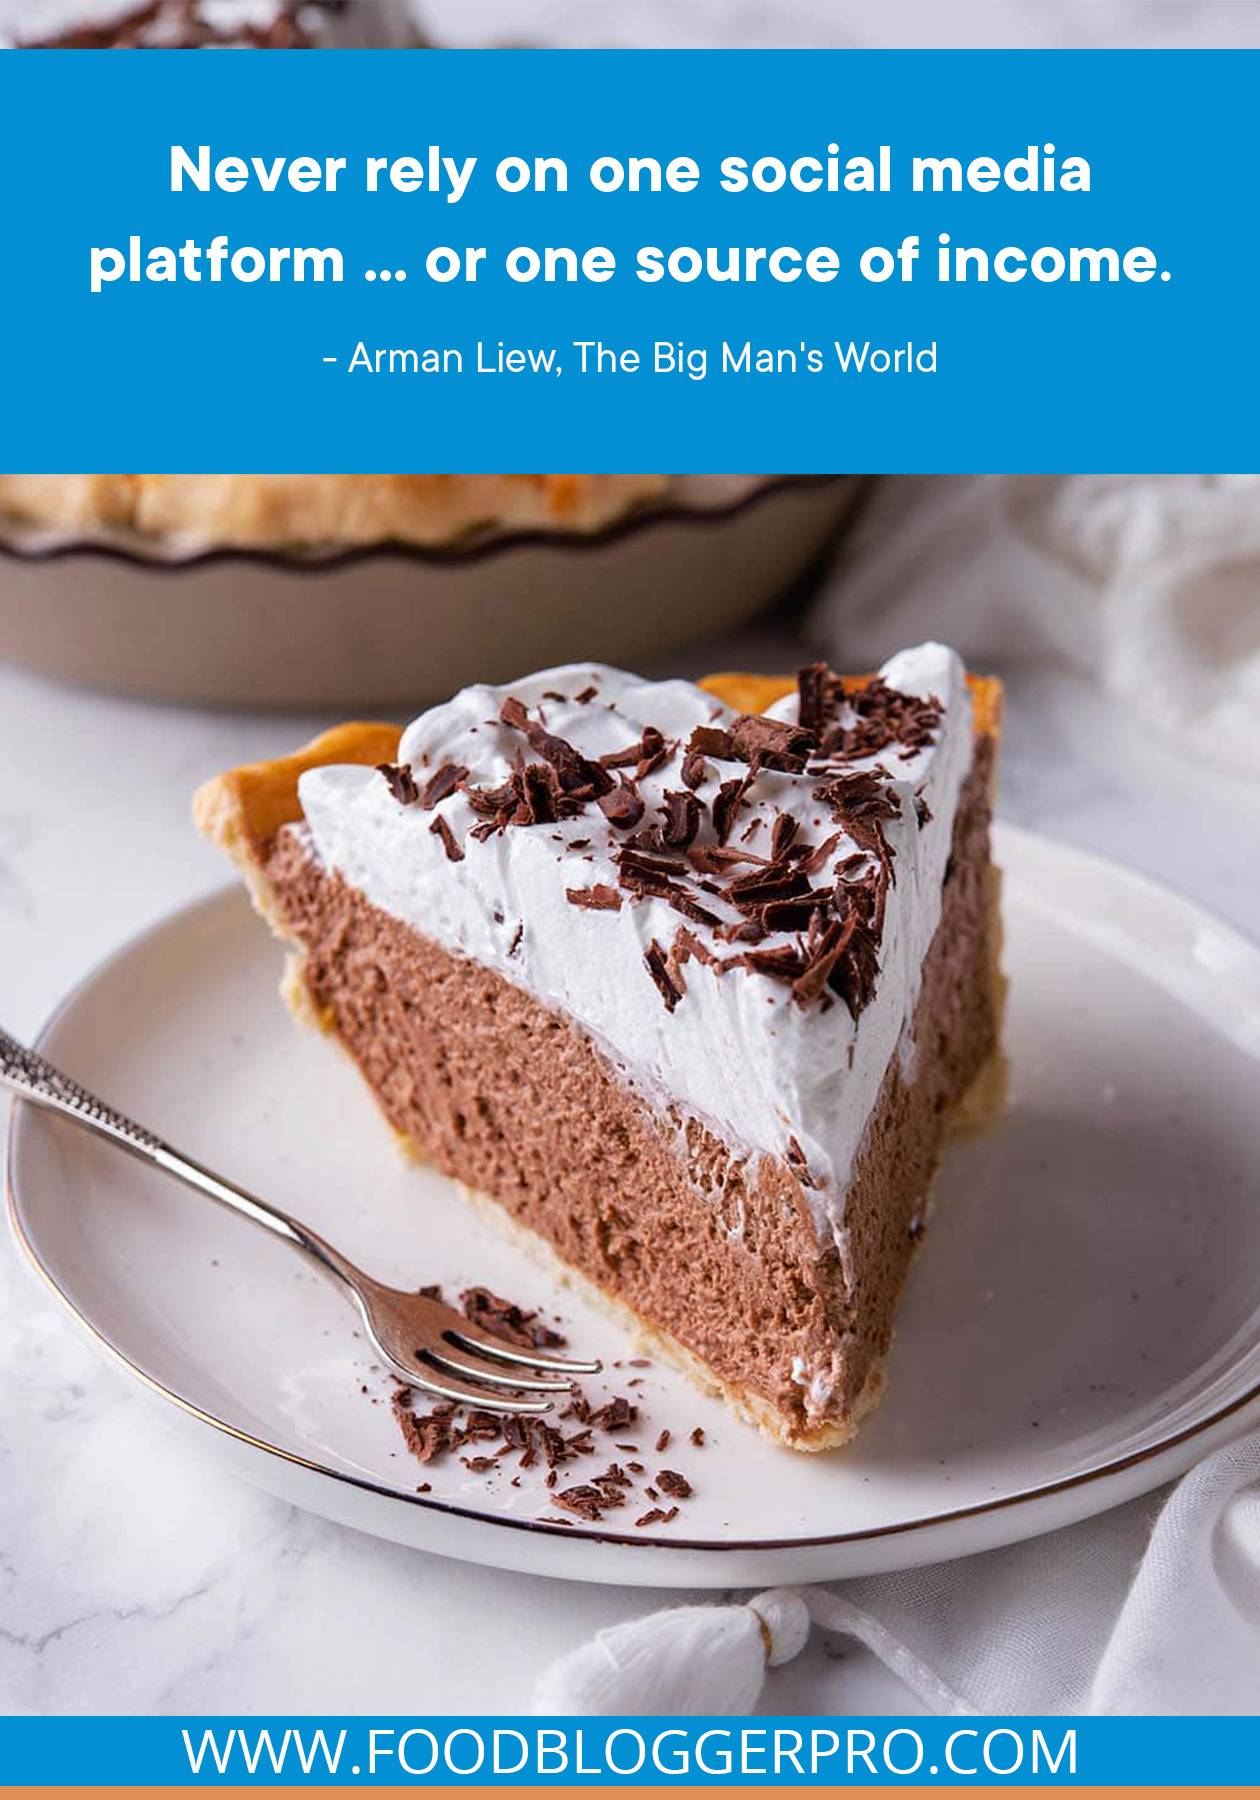 A photograph of a chocolate mousse pie with a quote from Arman Liew's episode of The Food Blogger Pro Podcast that reads: "Never rely on one social media platform... or one source of income."